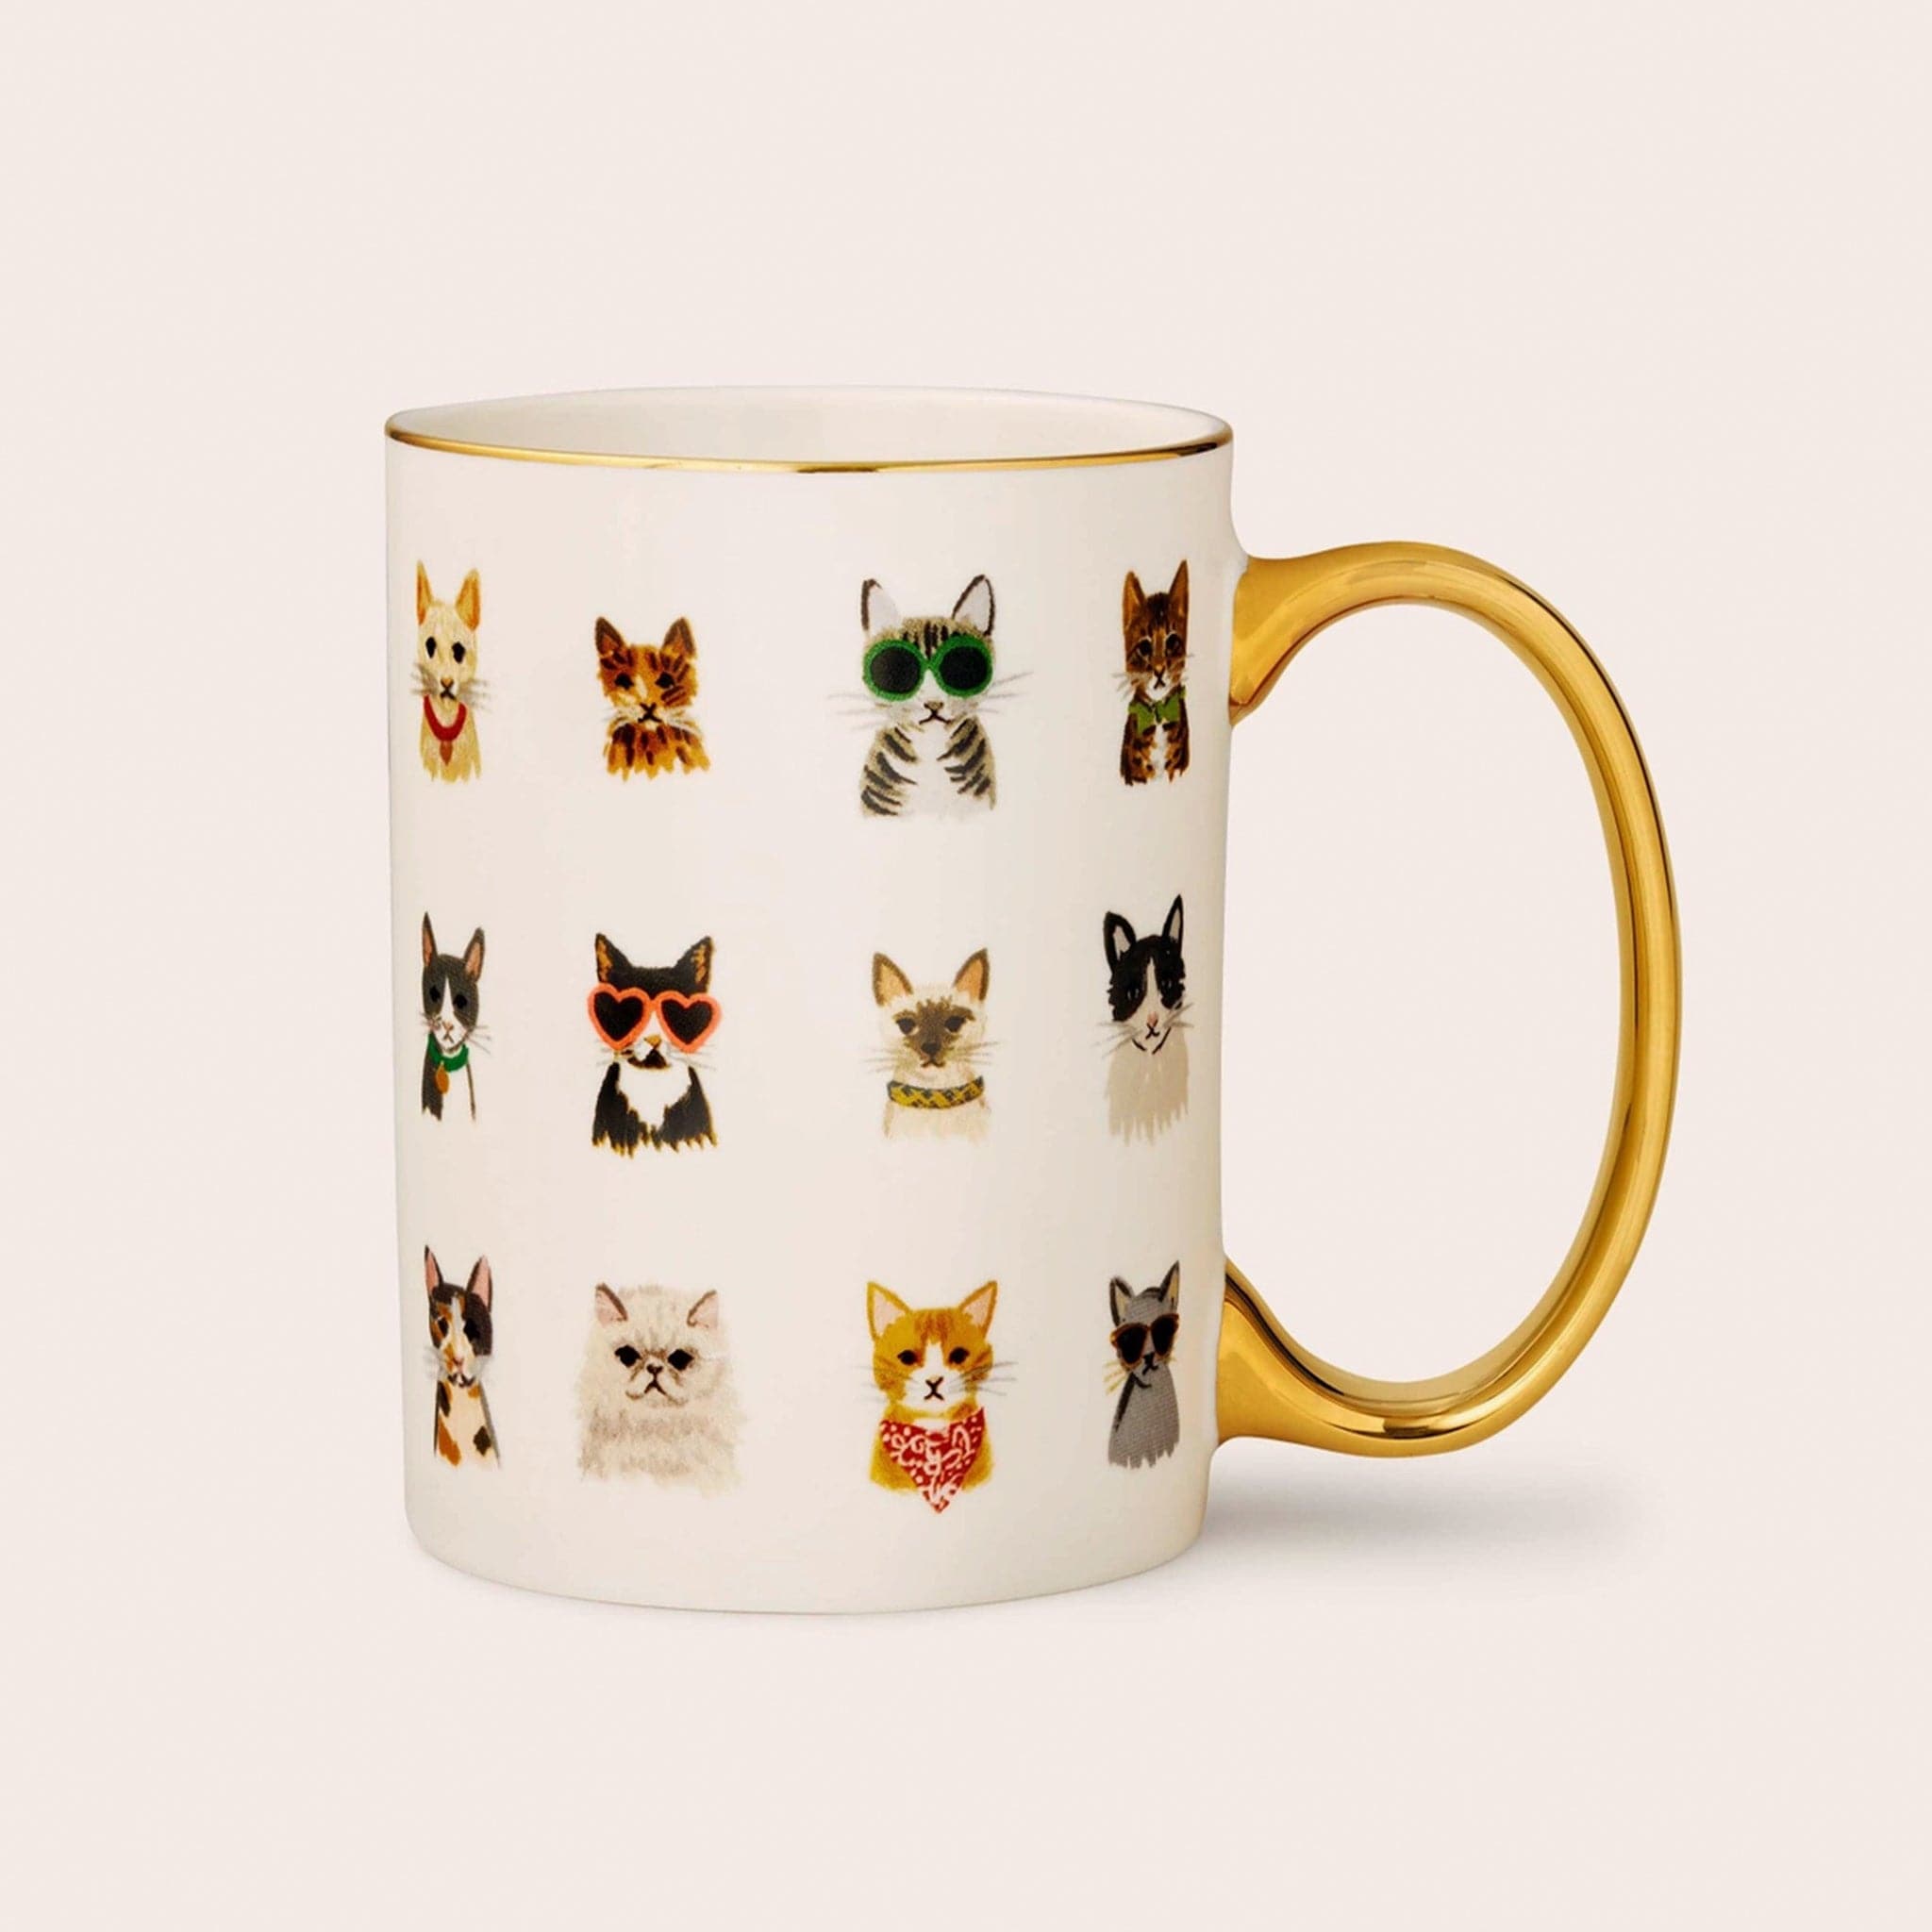 A luxurious porcelain mug featuring rows of different illustrated cats. Some cats are wearing cool sunglasses and patterned bandanas. This mug also has a gold handle and trim.